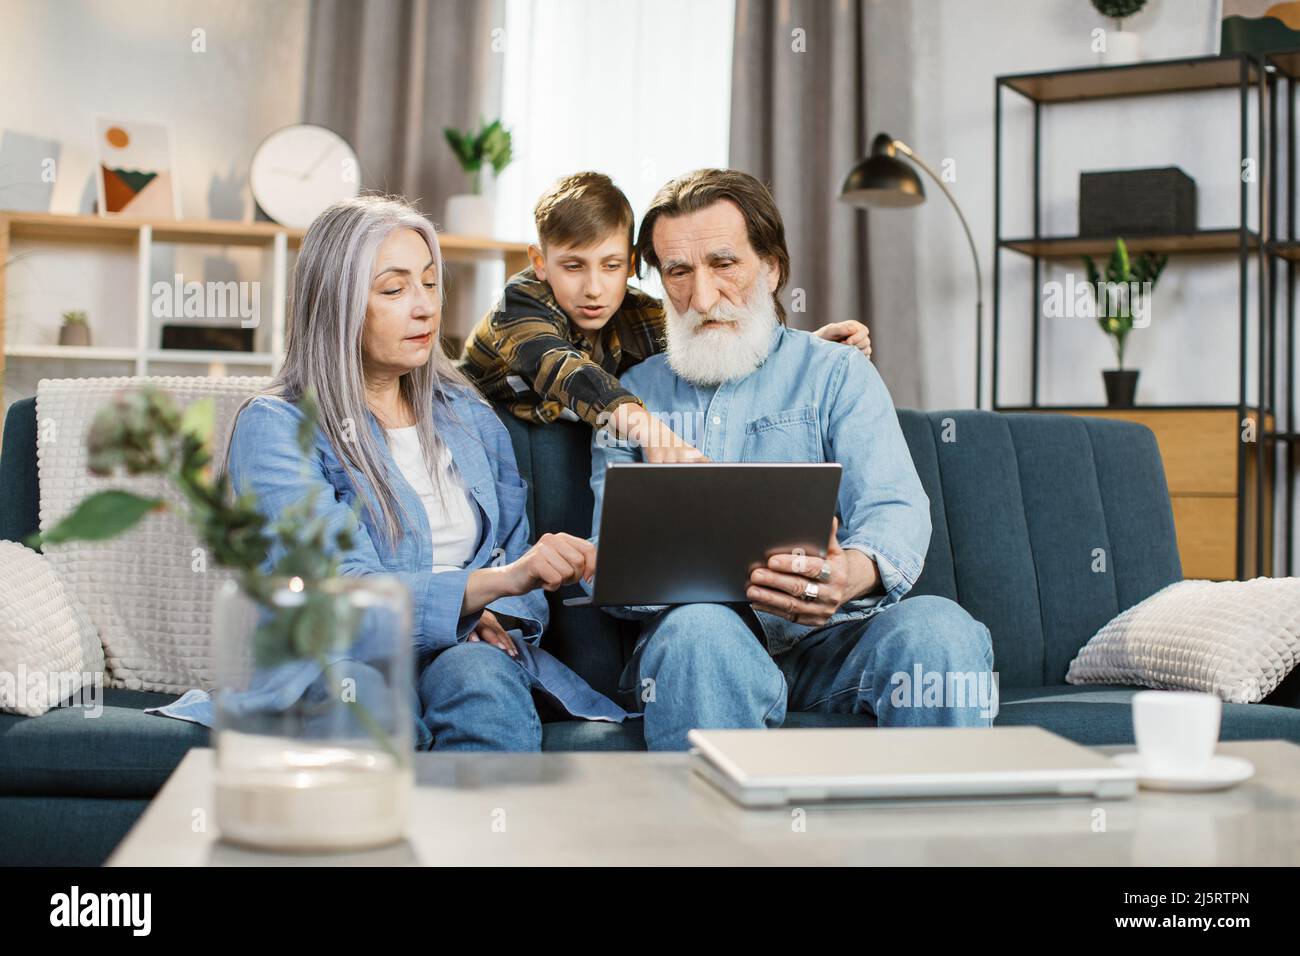 Pleasant happy smiling family of grandparents and grandson sitting on sofa at home and making online shopping together. Young happy boy shows something on the screen to his grandmother and grandfather Stock Photo